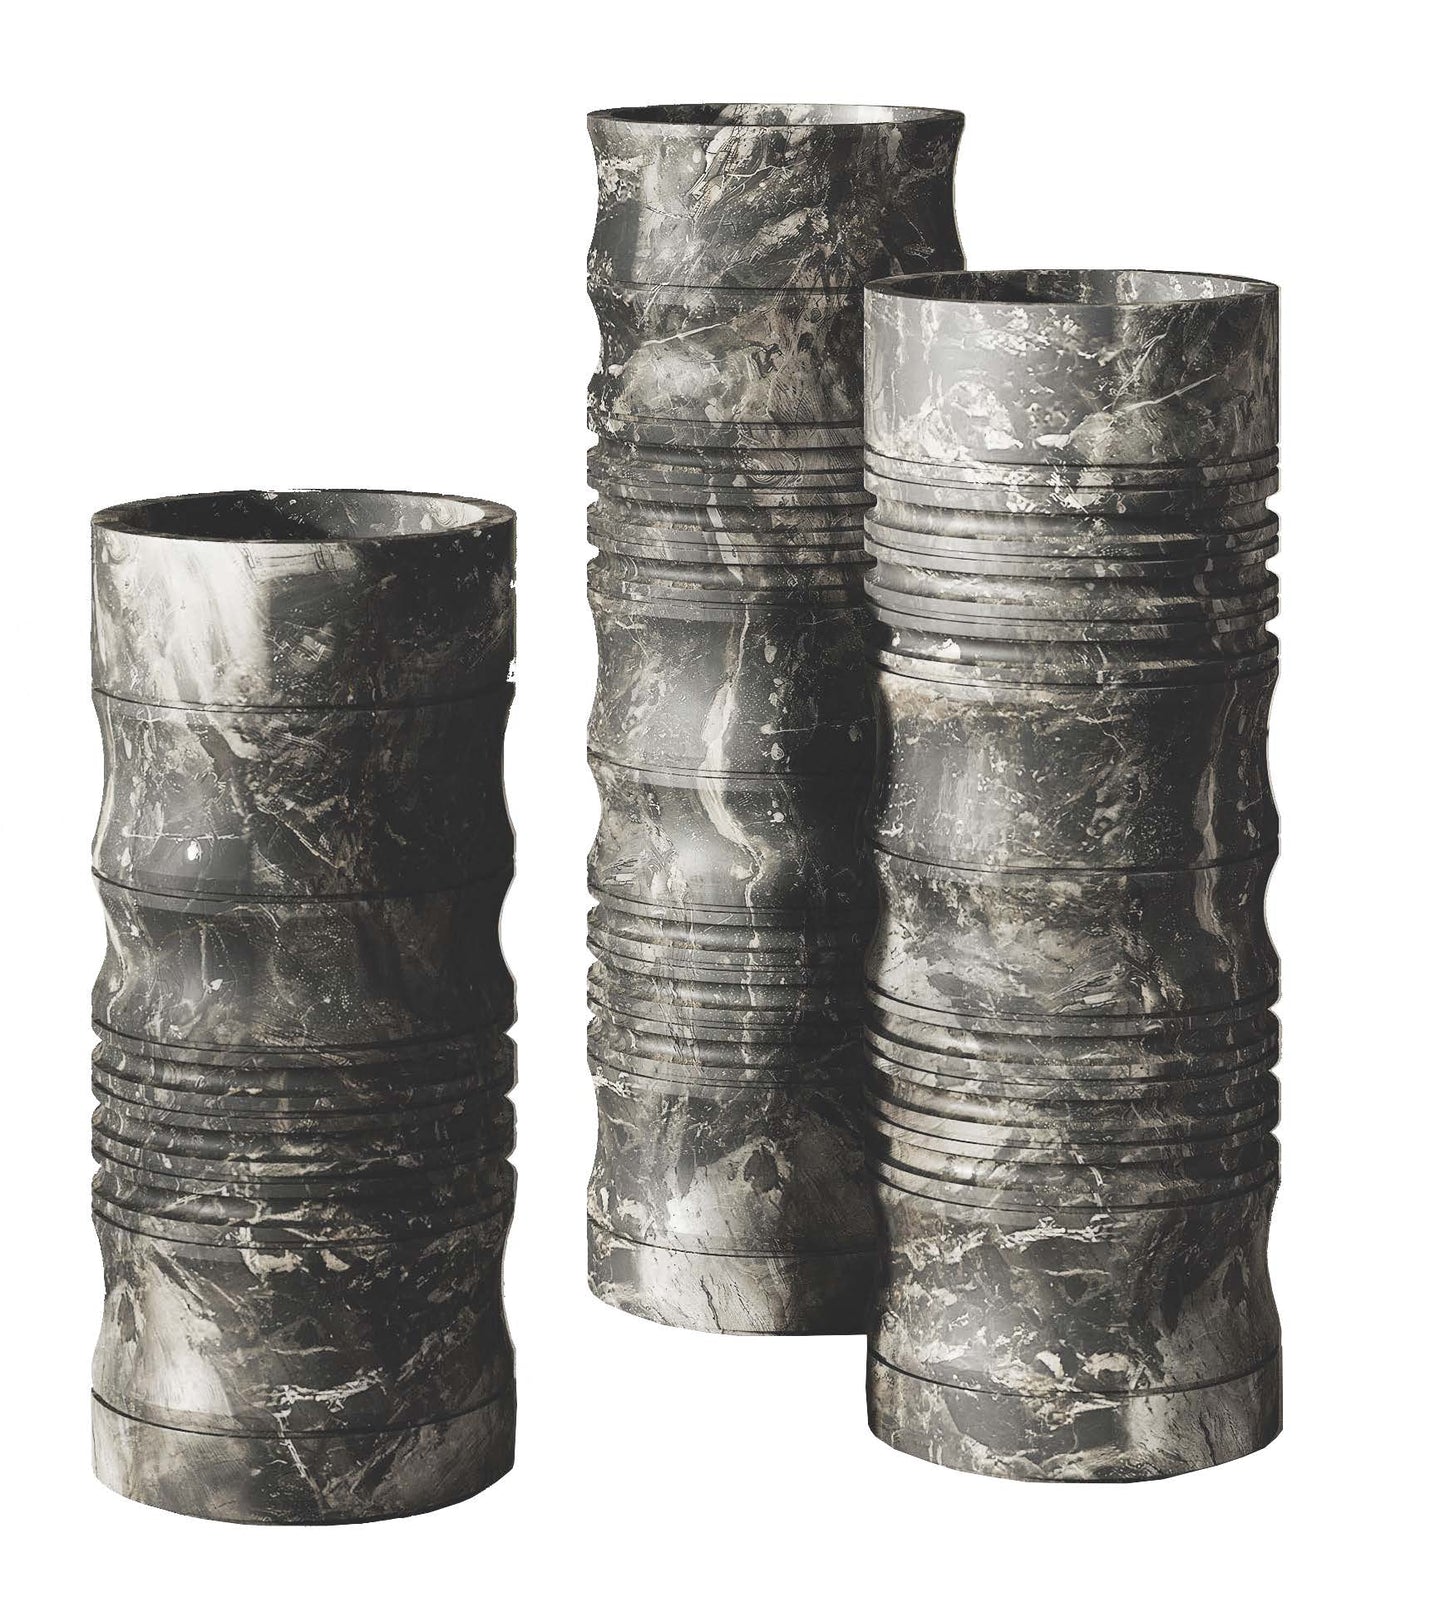 ANGKOR RIBBED VESSEL | COLLECTION PIETRA CASA | QUOTE BY REQUEST